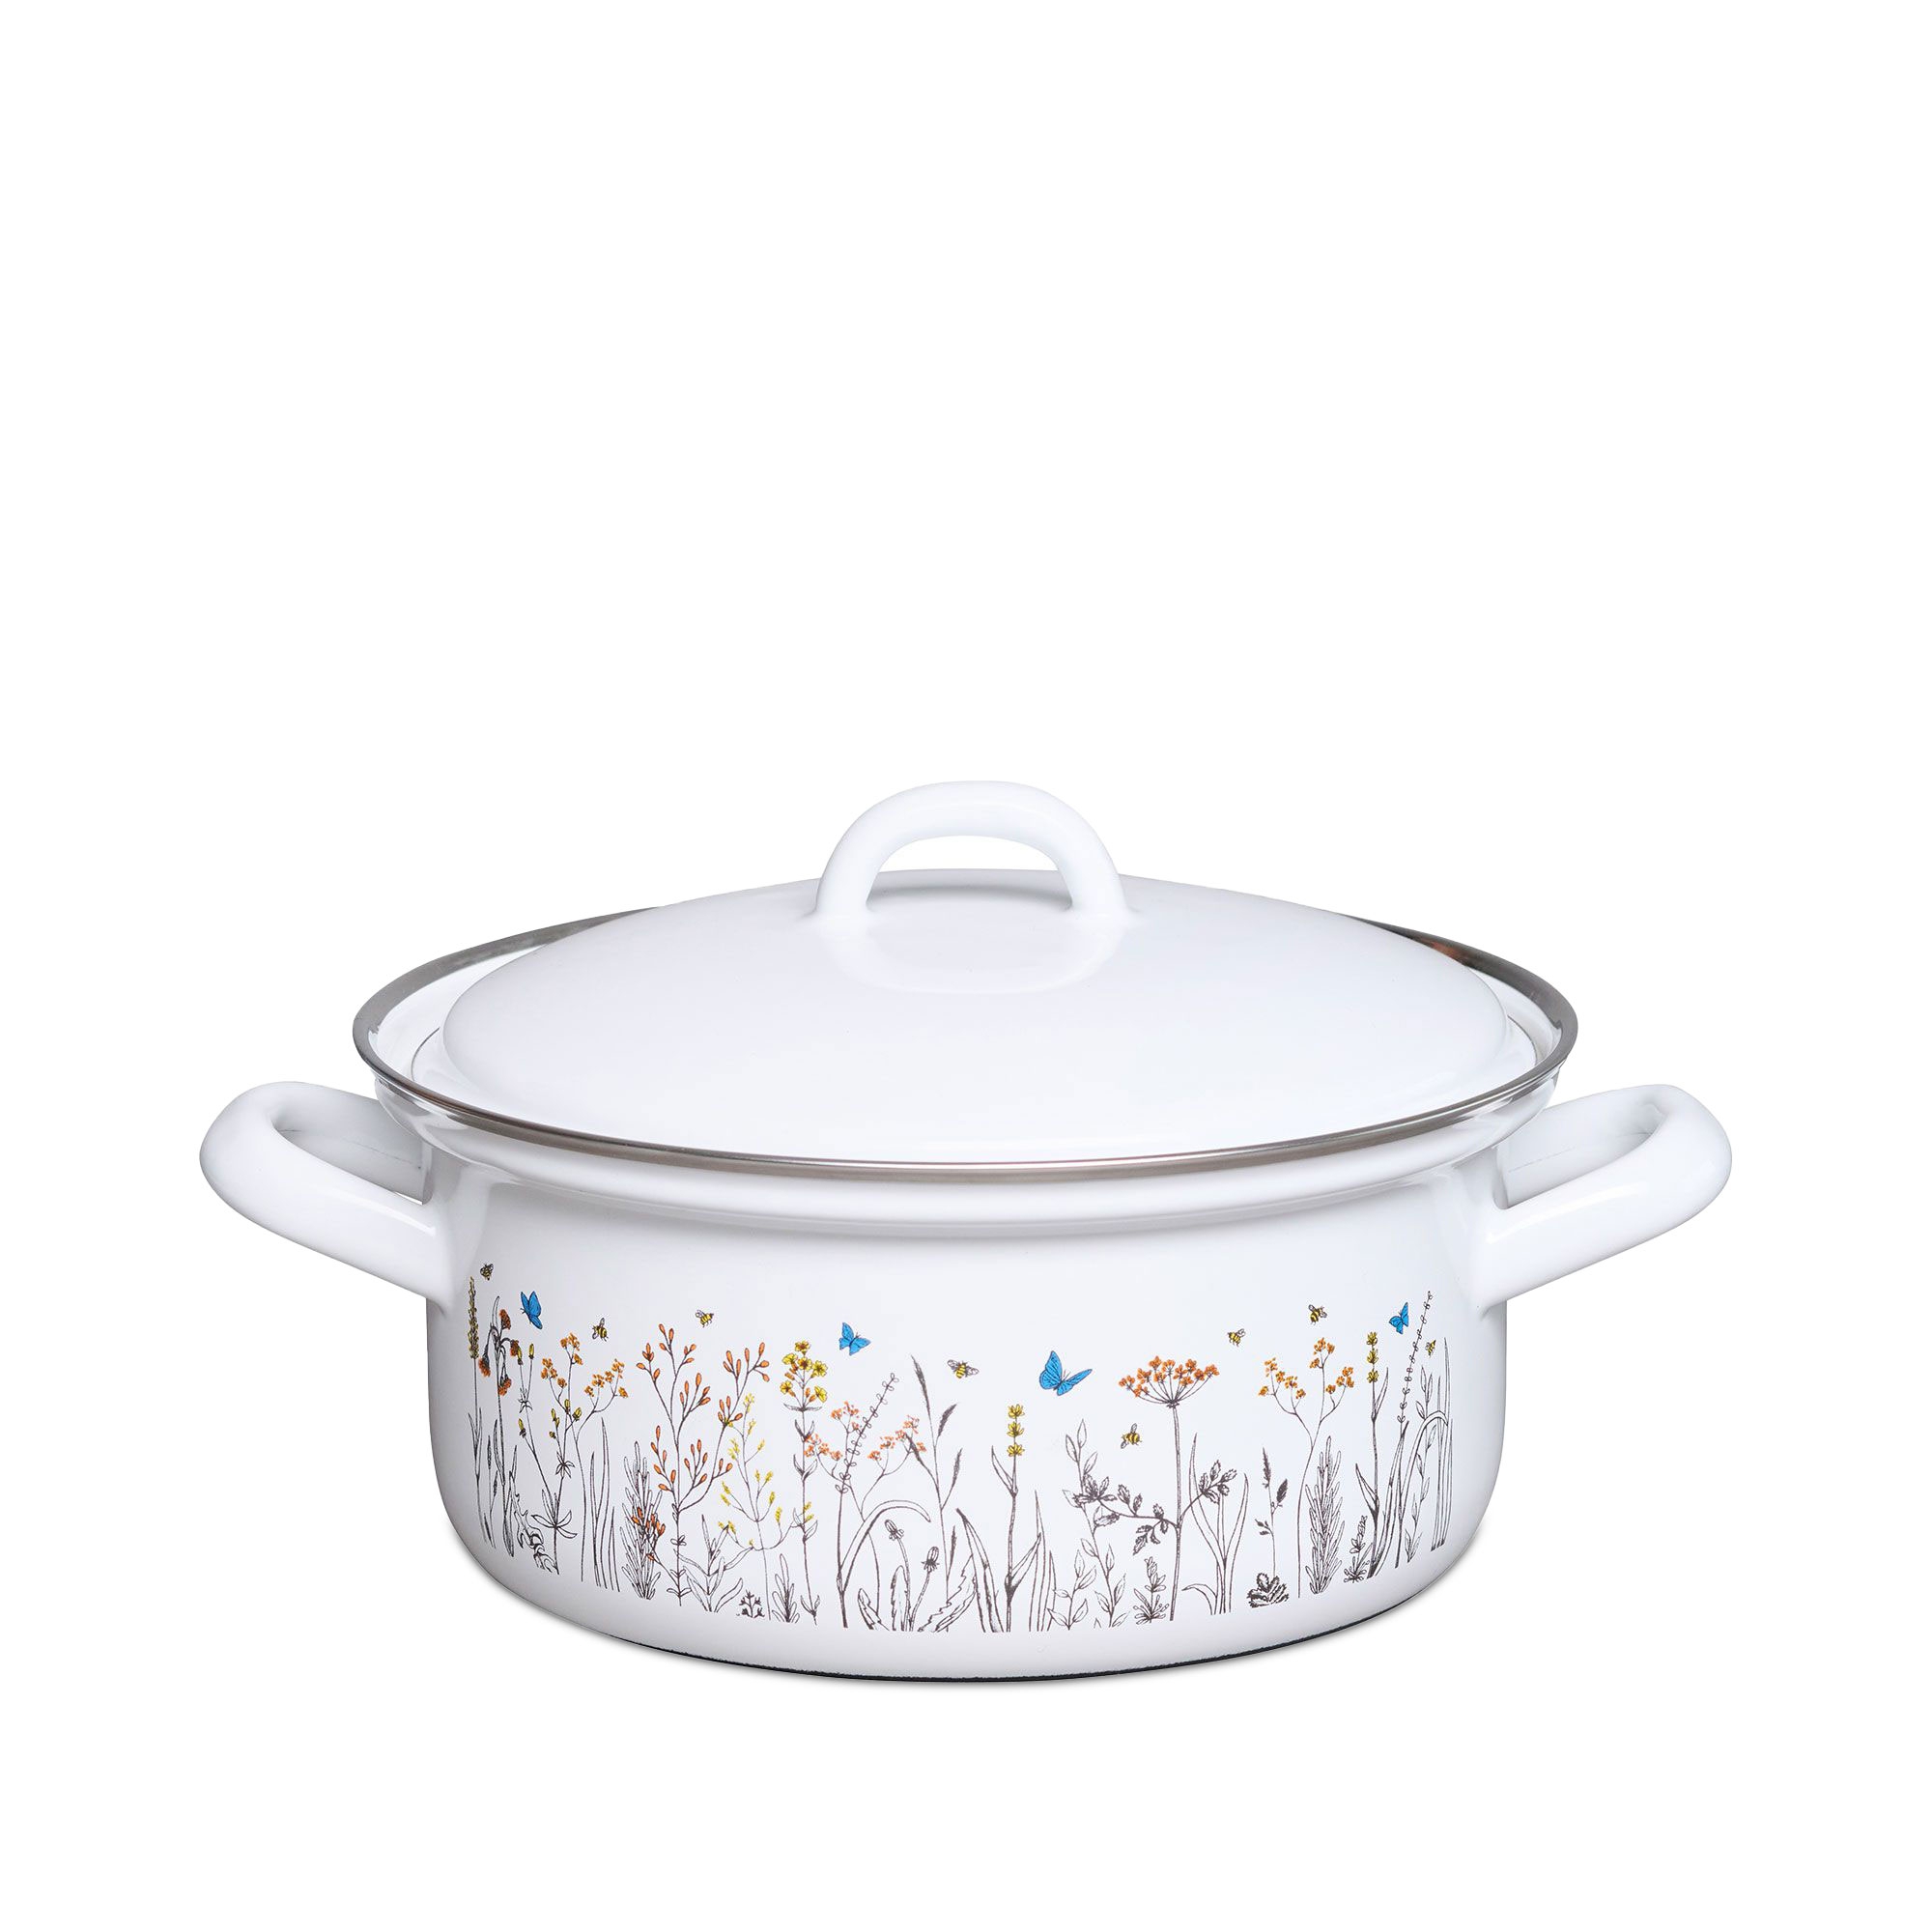 Riess SPECIAL DECOR - herb garden - casserole dish with lid 16 cm